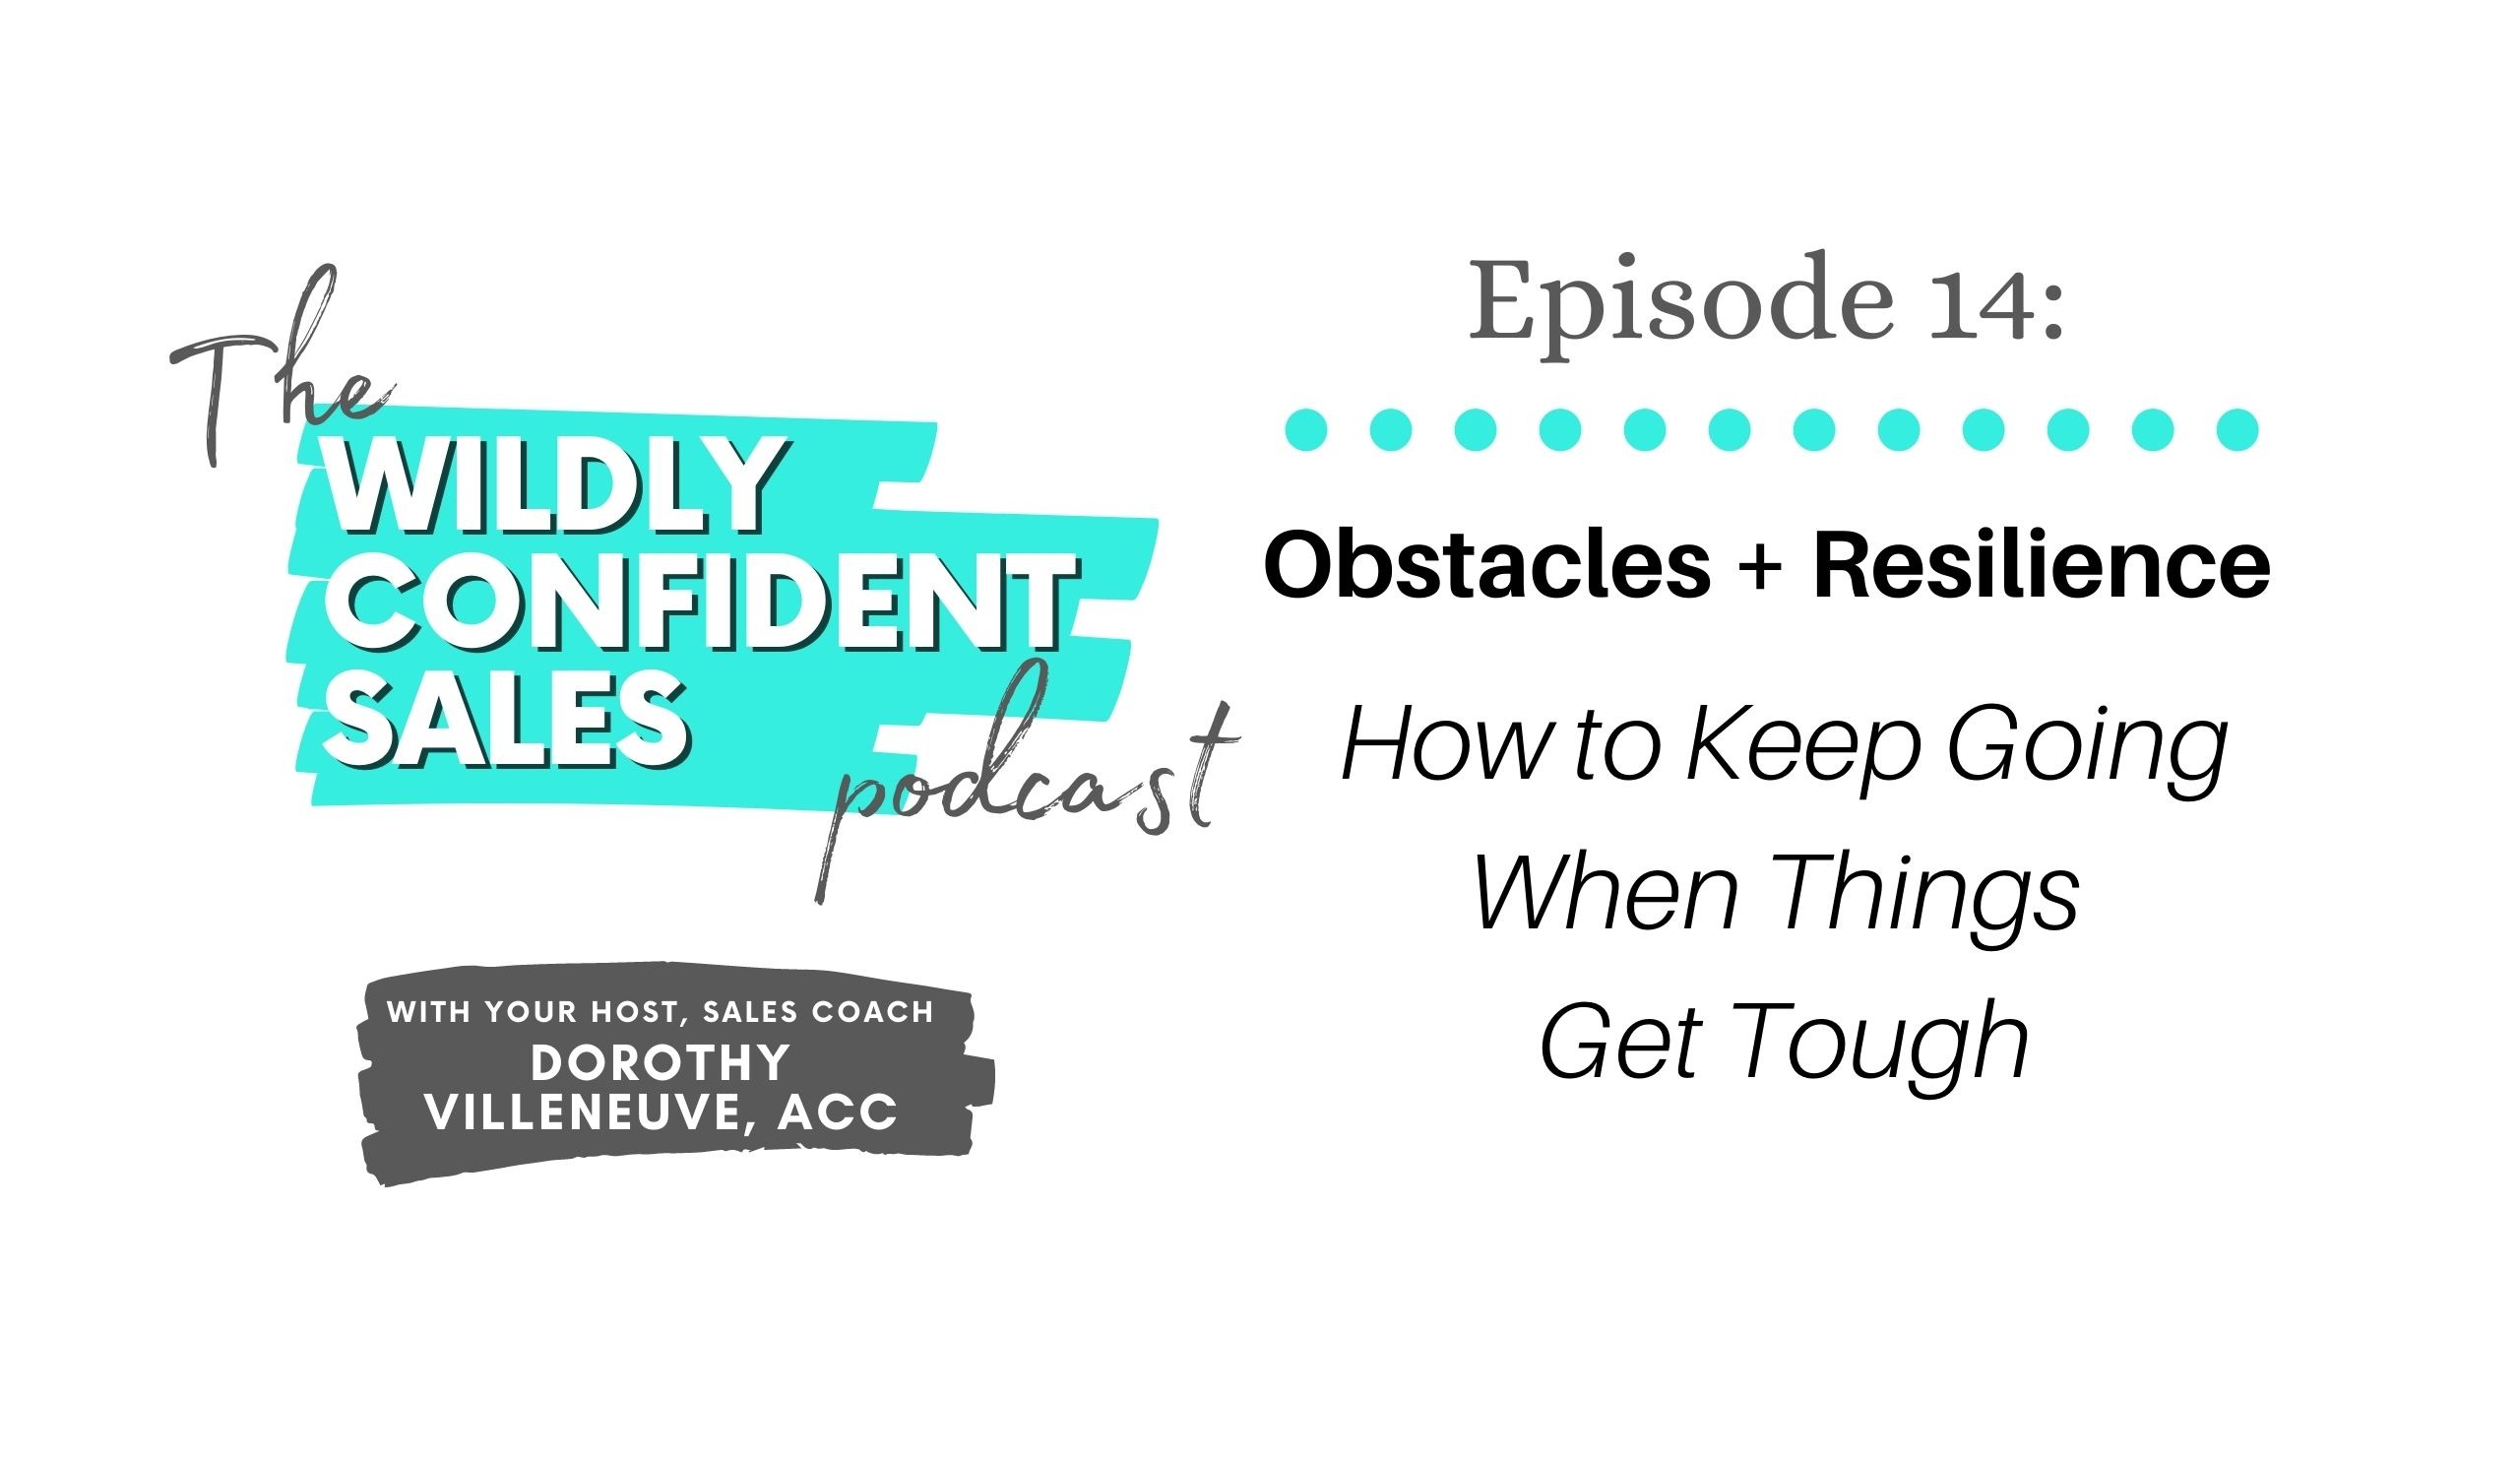 Obstacles and Resilience: How to keep going when things get tough